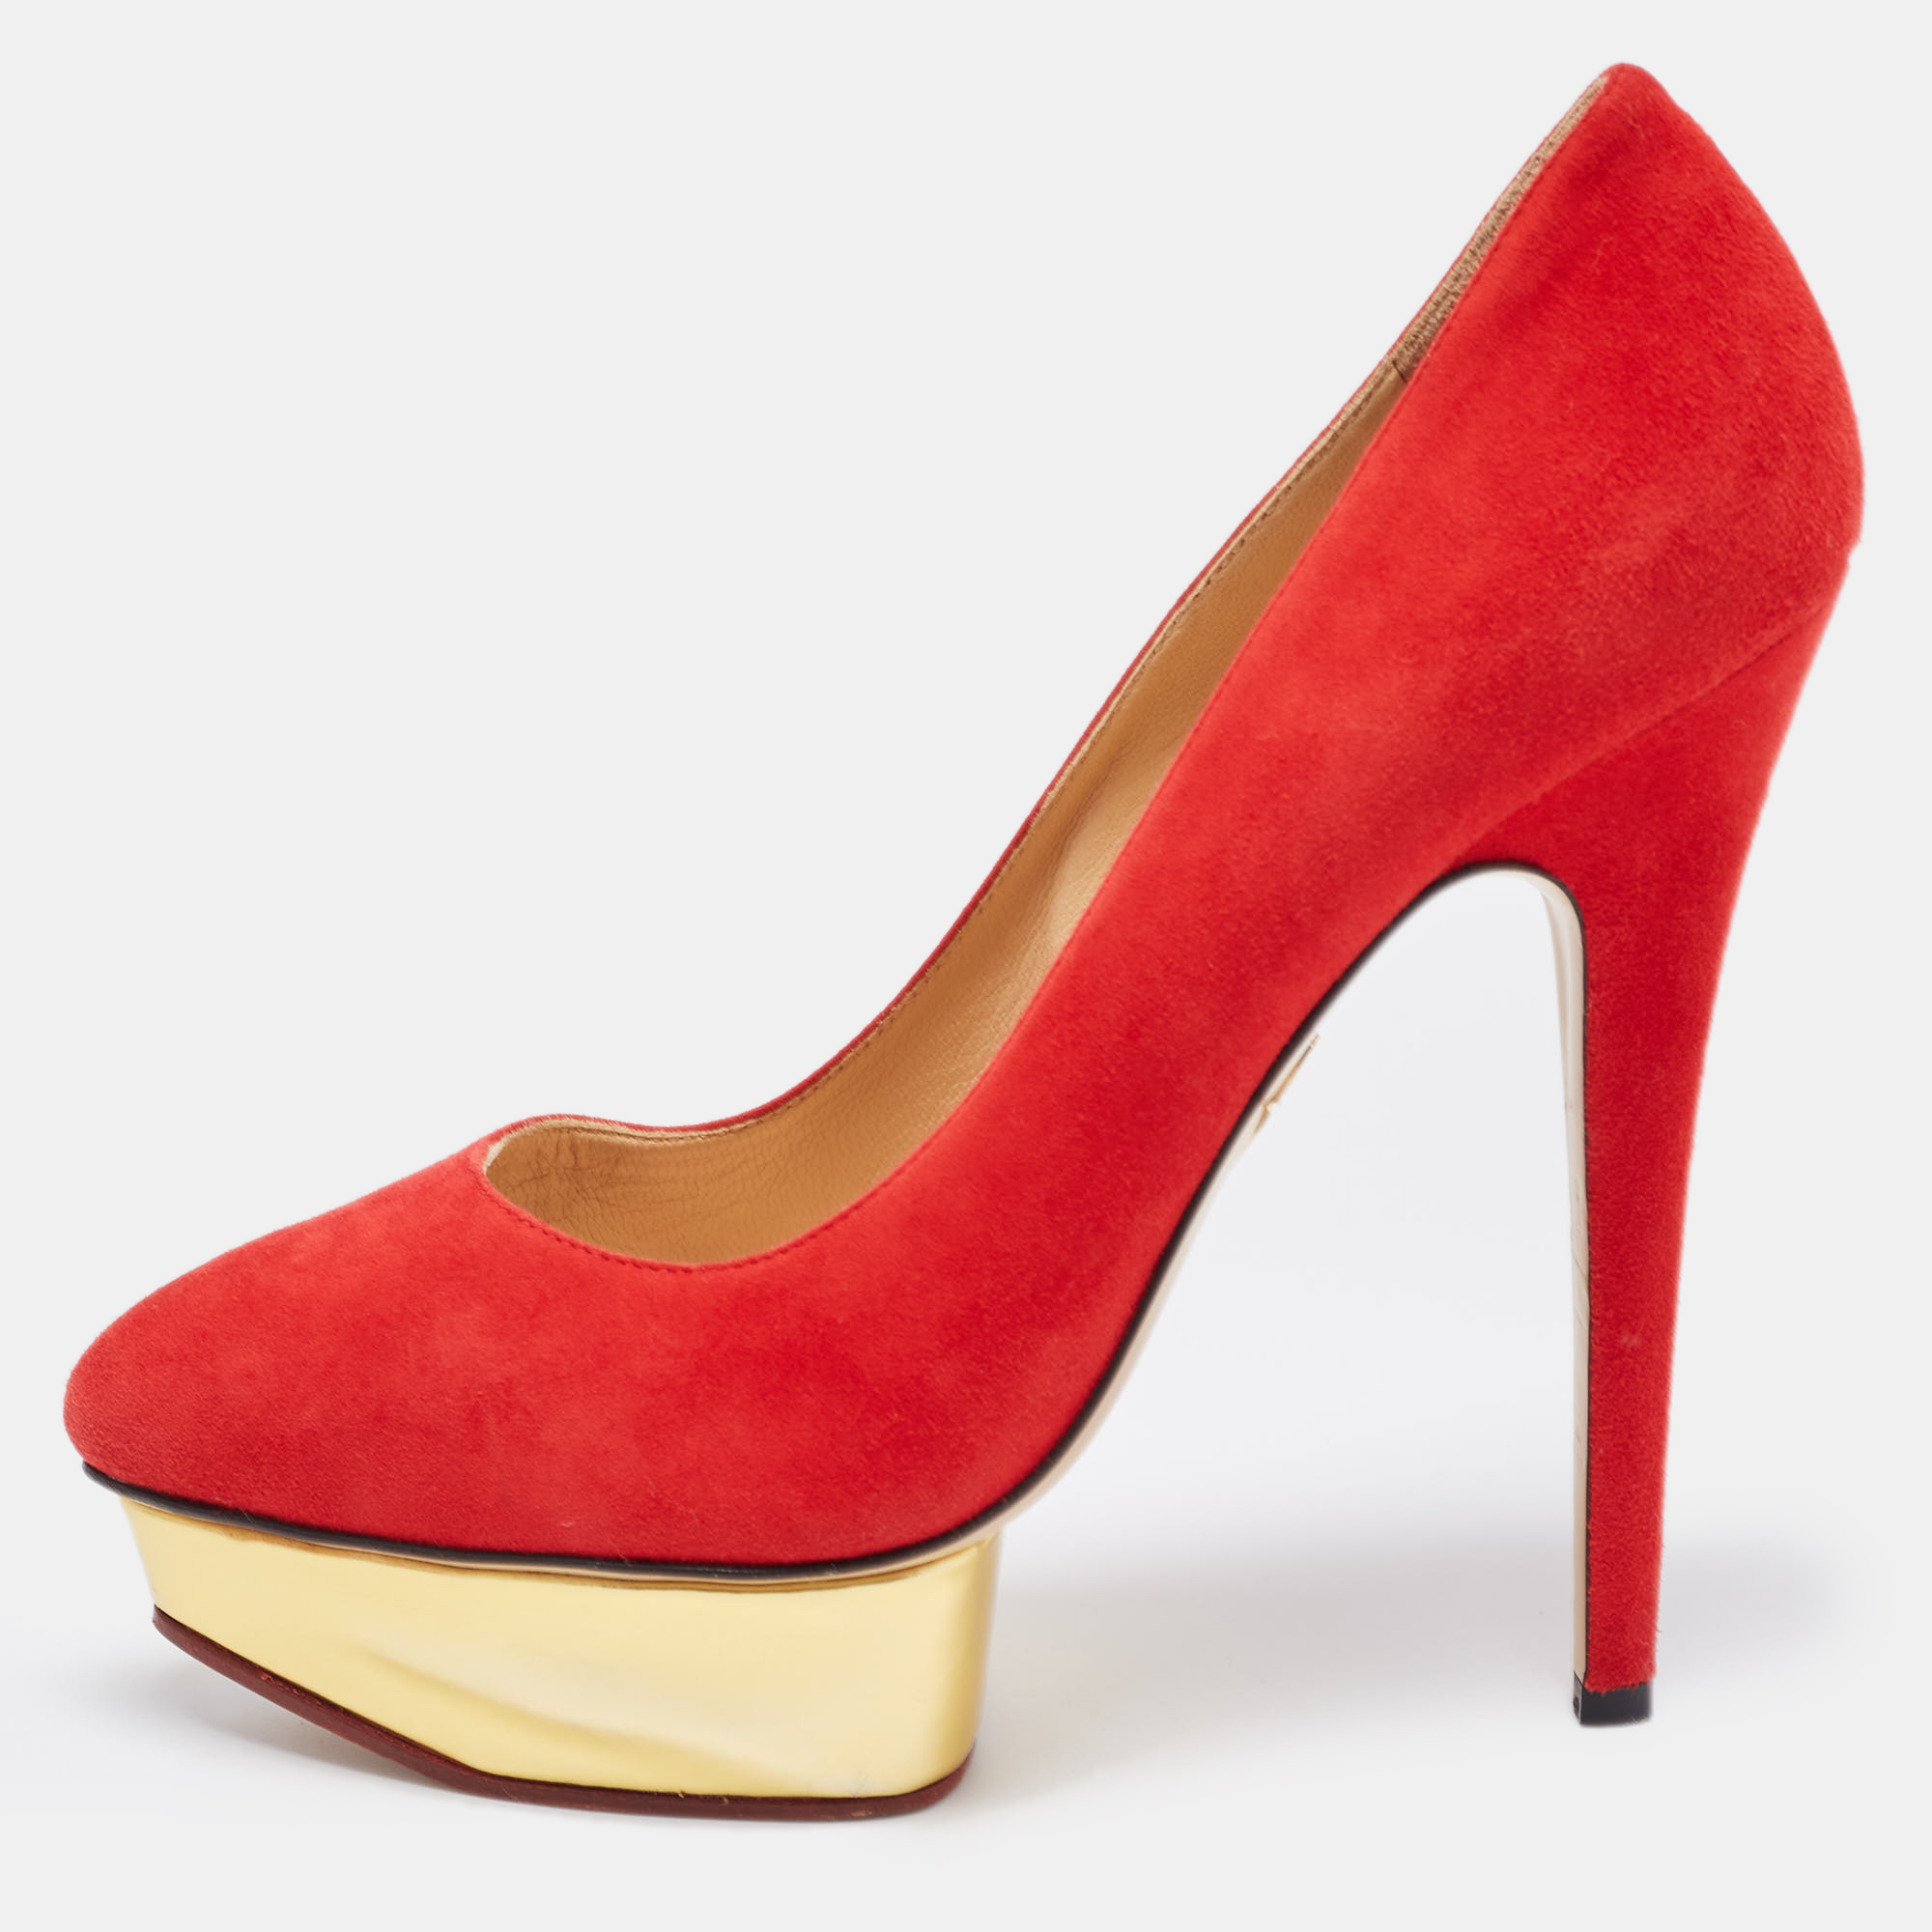 Pre-owned Charlotte Olympia Red Suede Dolly Platform Pumps Size 38.5